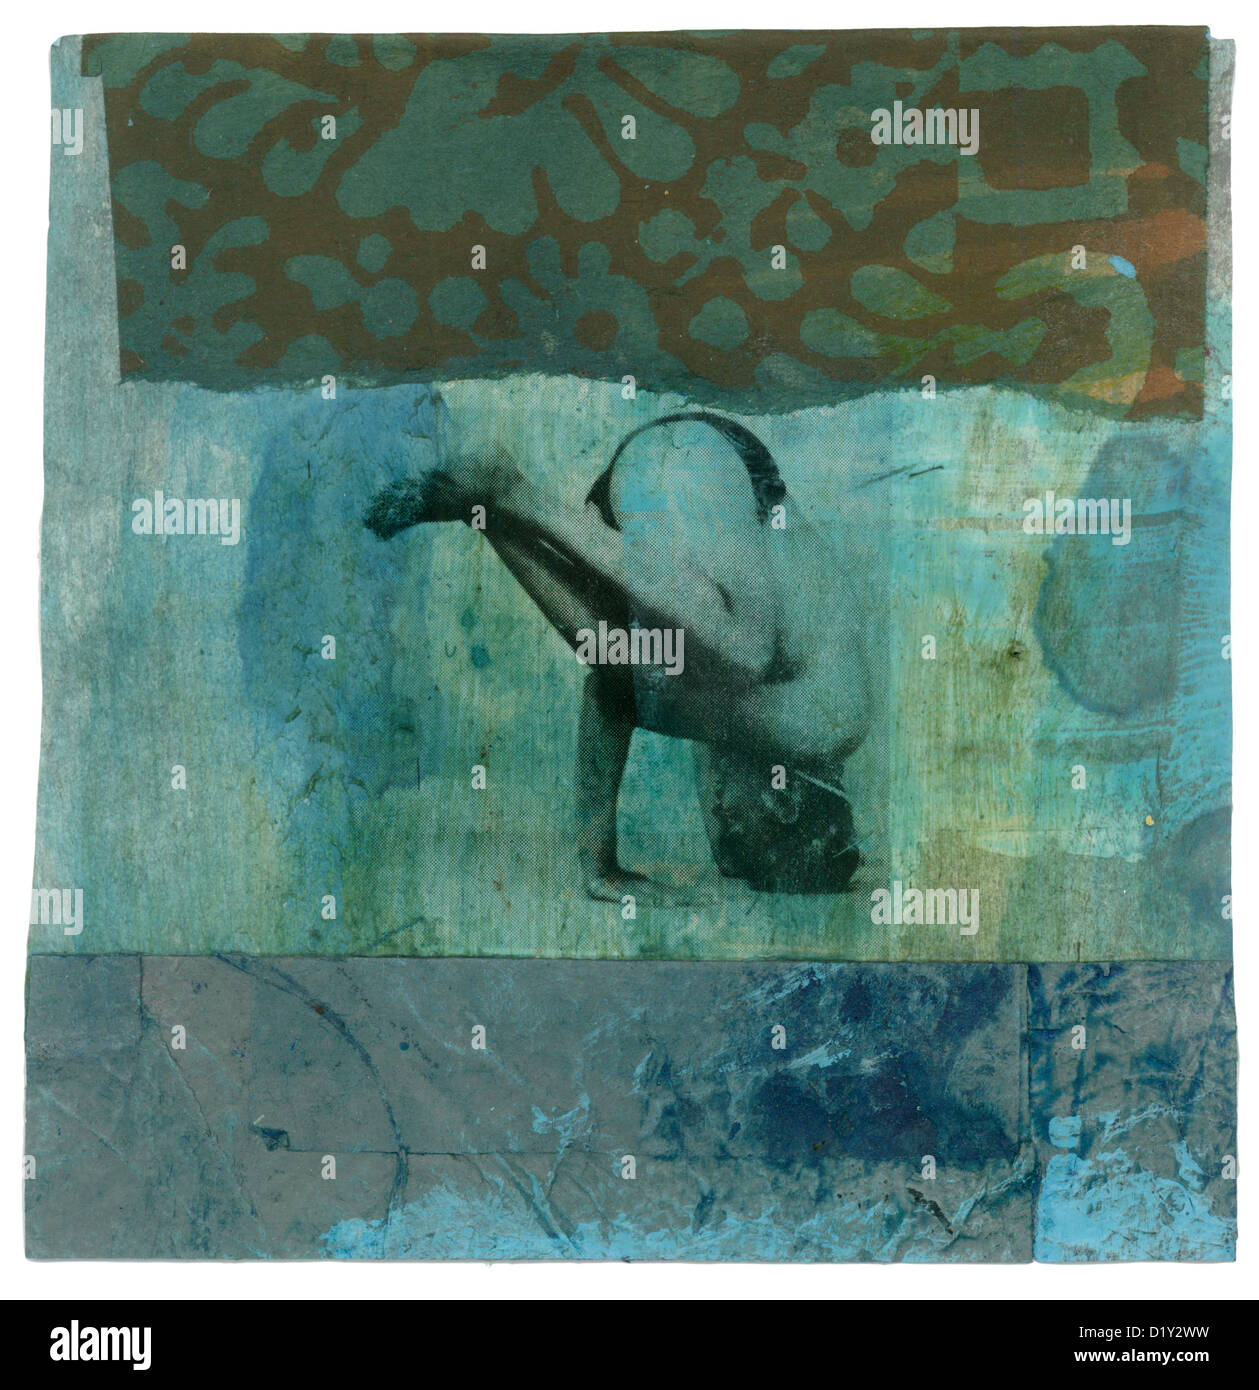 Stained and collaged image from Light on Yoga. Stock Photo